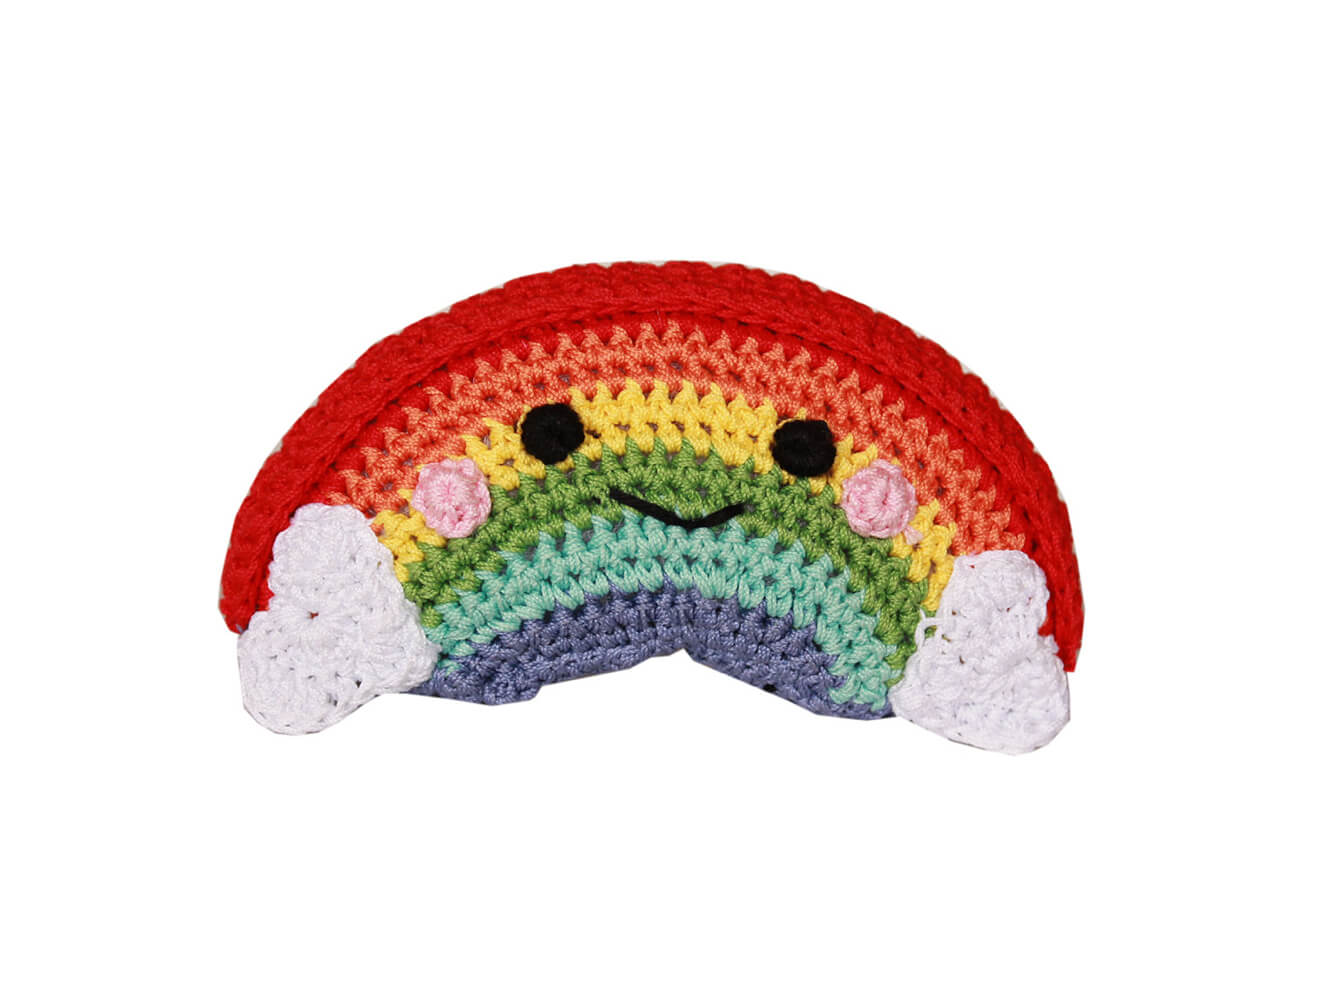 Knit Knacks &quot;Happy Rainbow&quot; handmade organic cotton dog toy. Anthropomorphic rainbow with a smiling face, rosy cheeks, and heart shaped cloud accents.